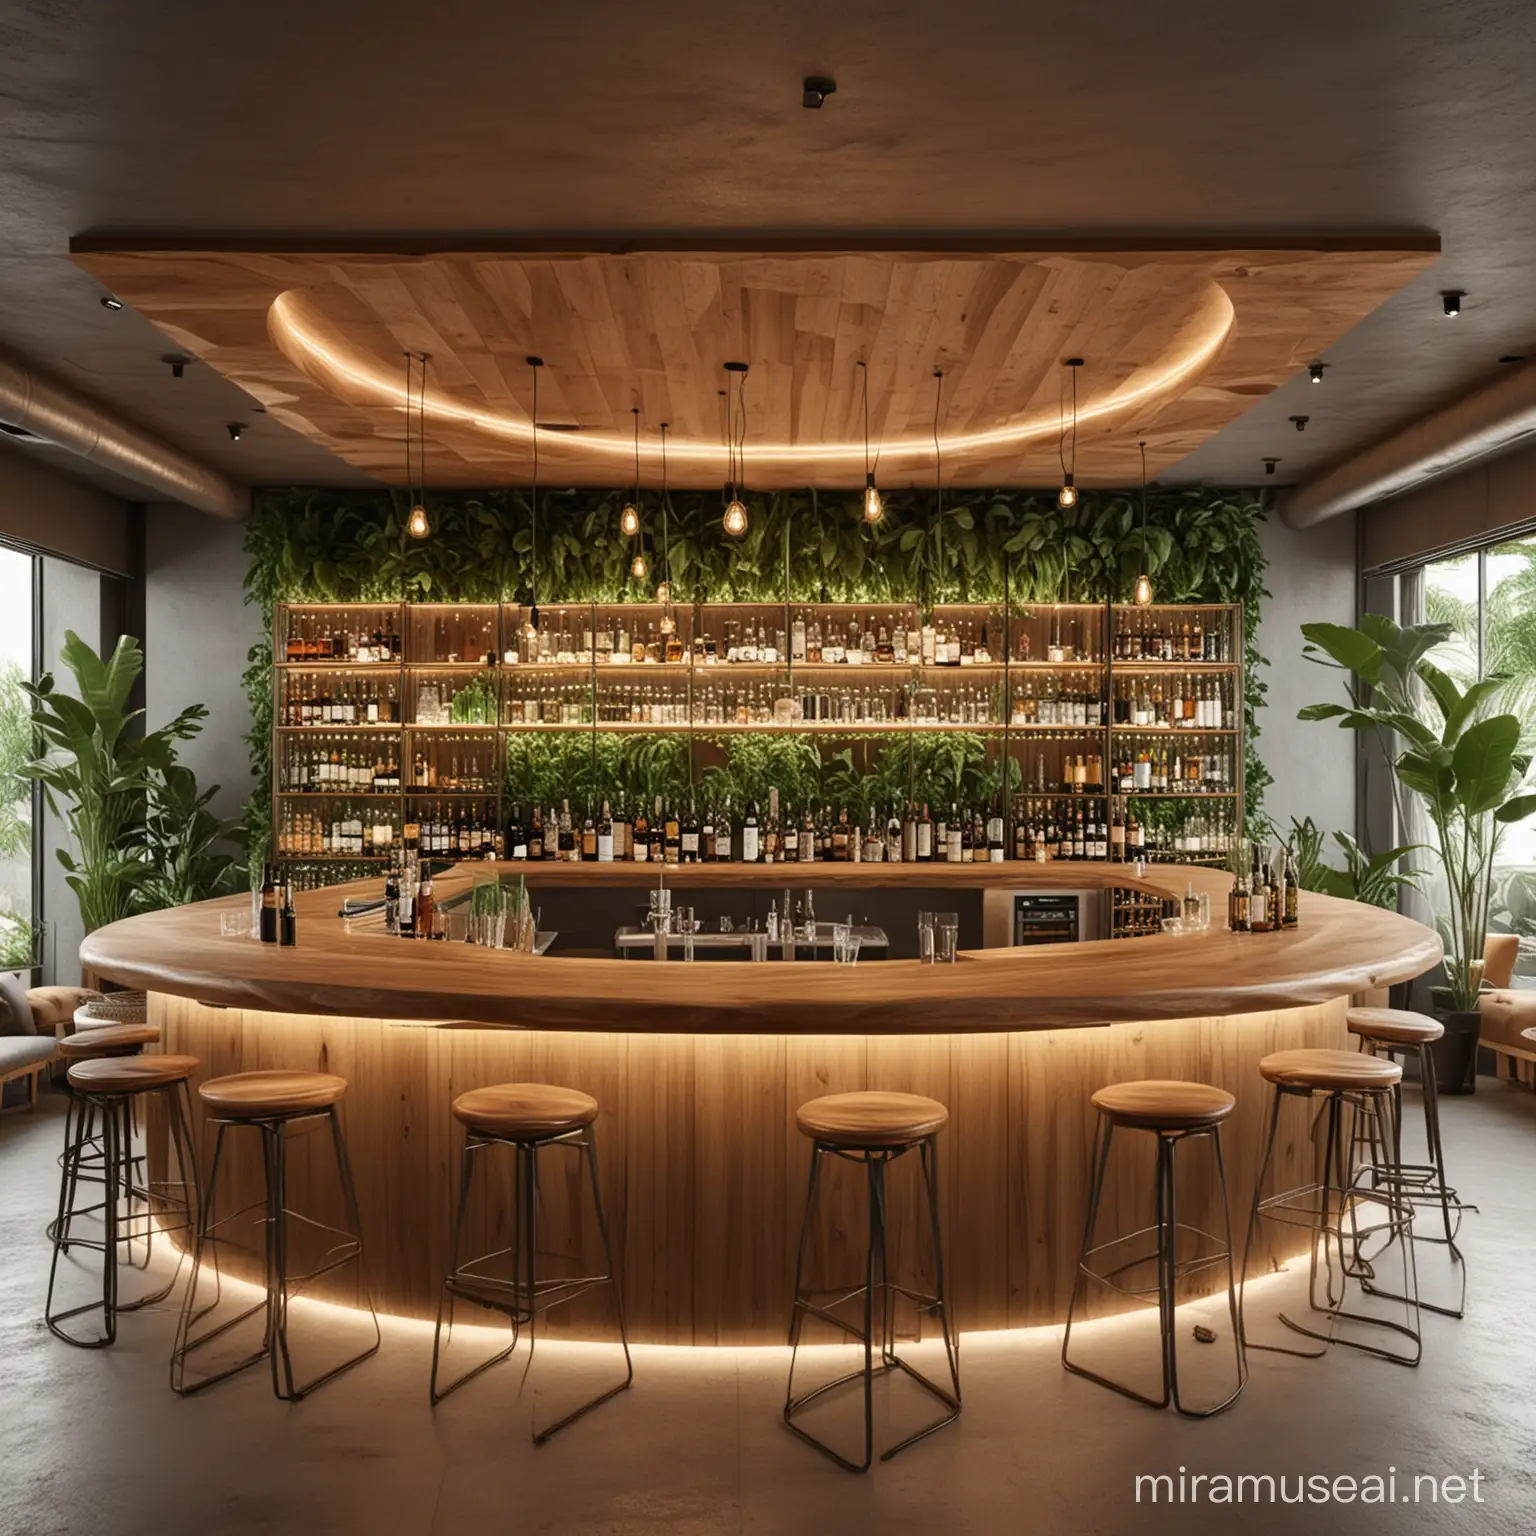 Modern Organic Bar and Restaurant Interior Design with Natural Elements